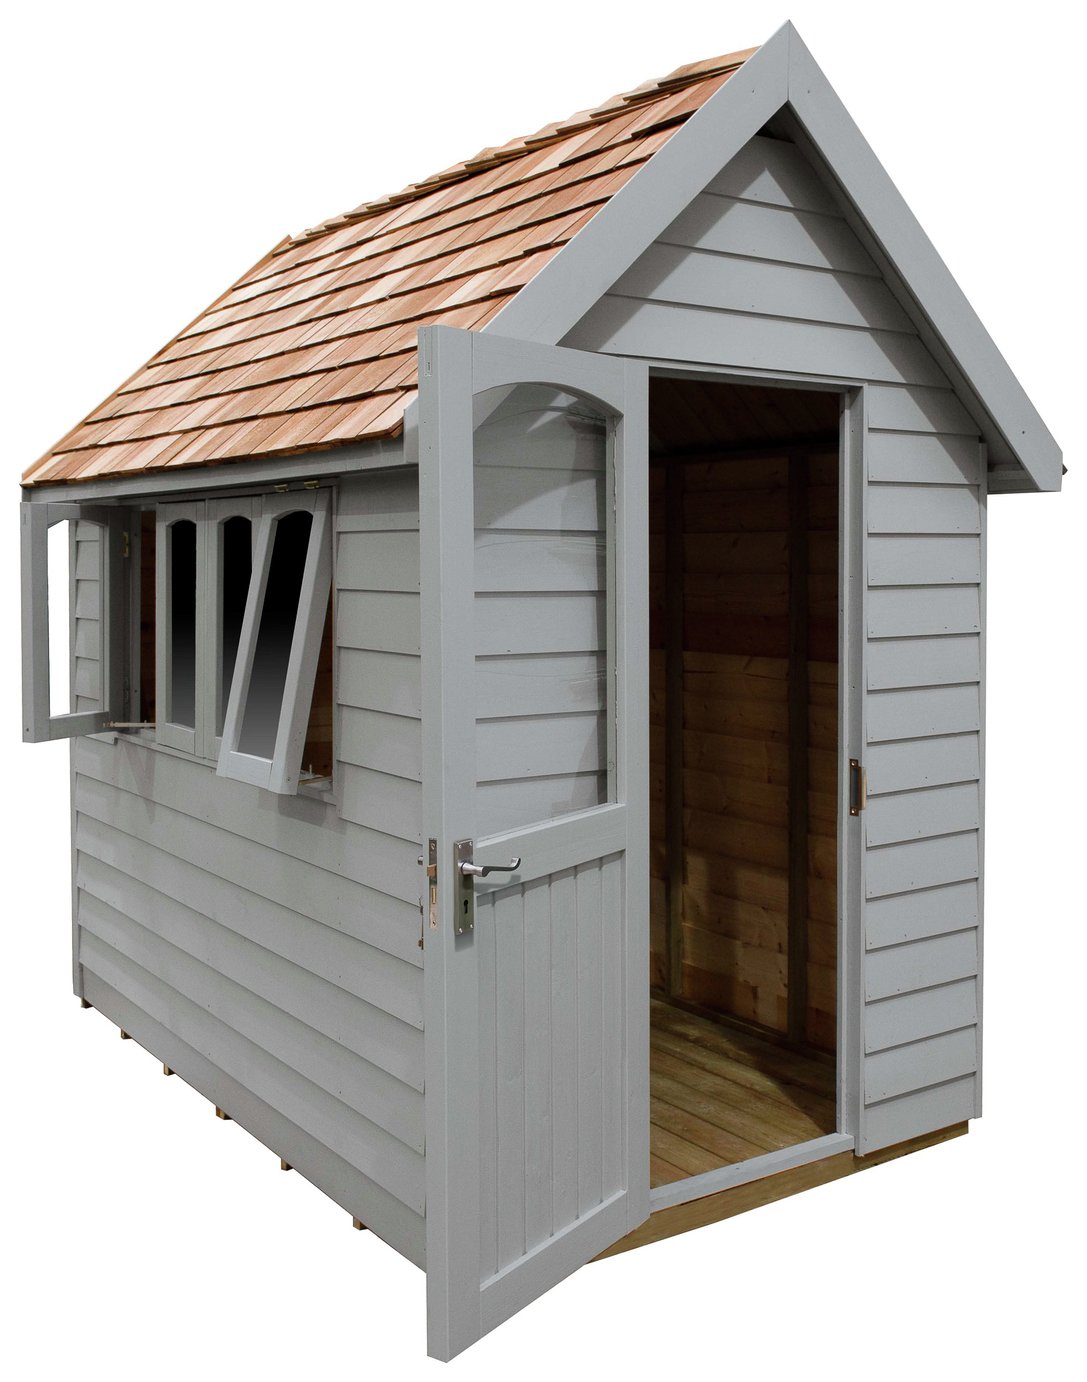 Forest Garden Overlap Retreat Shed - 8x5ft, Grey, Installed